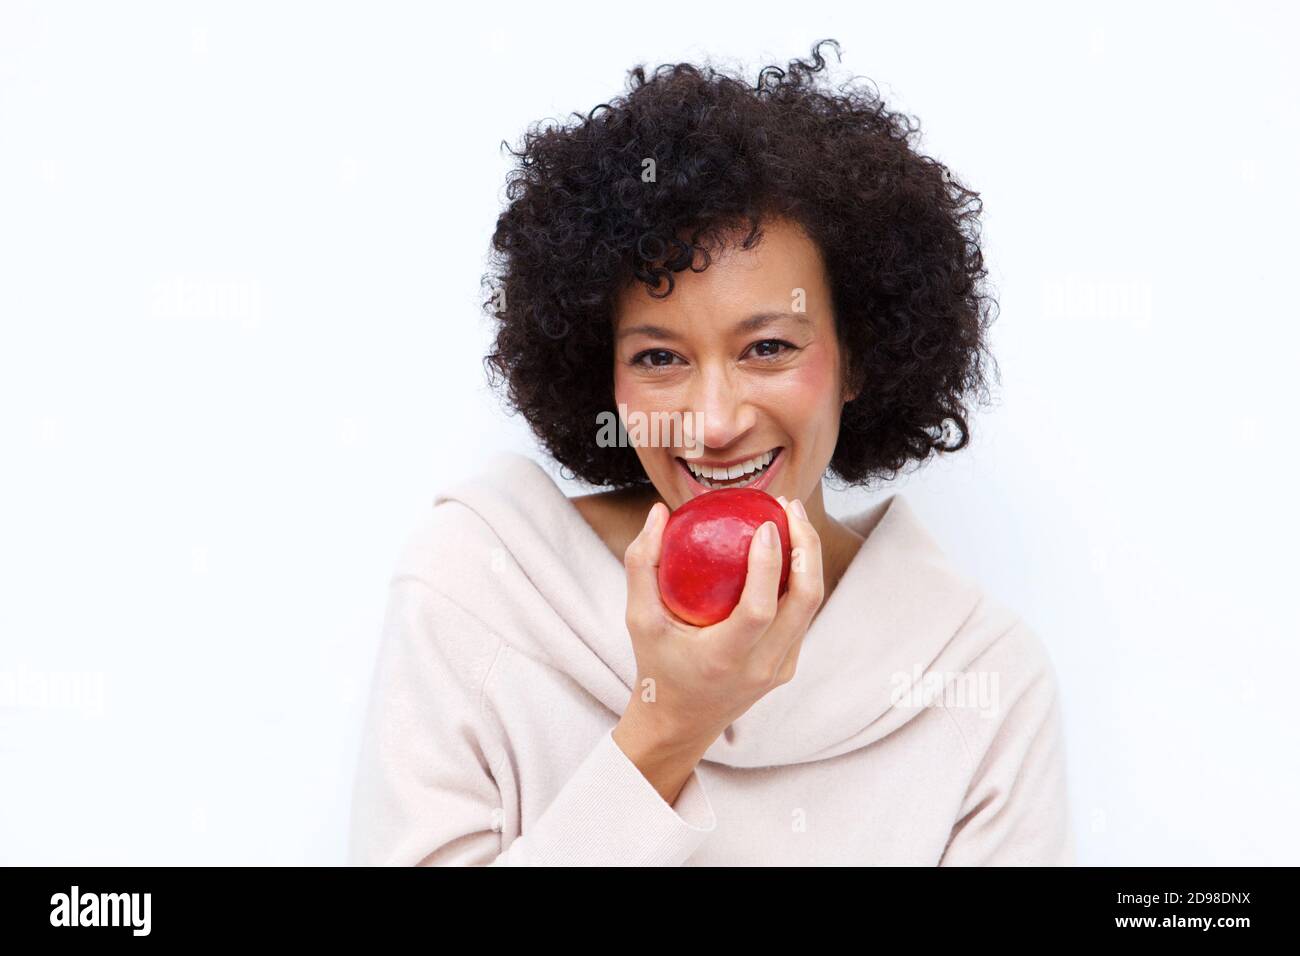 Close up portrait of healthy african american woman eating apple Stock Photo